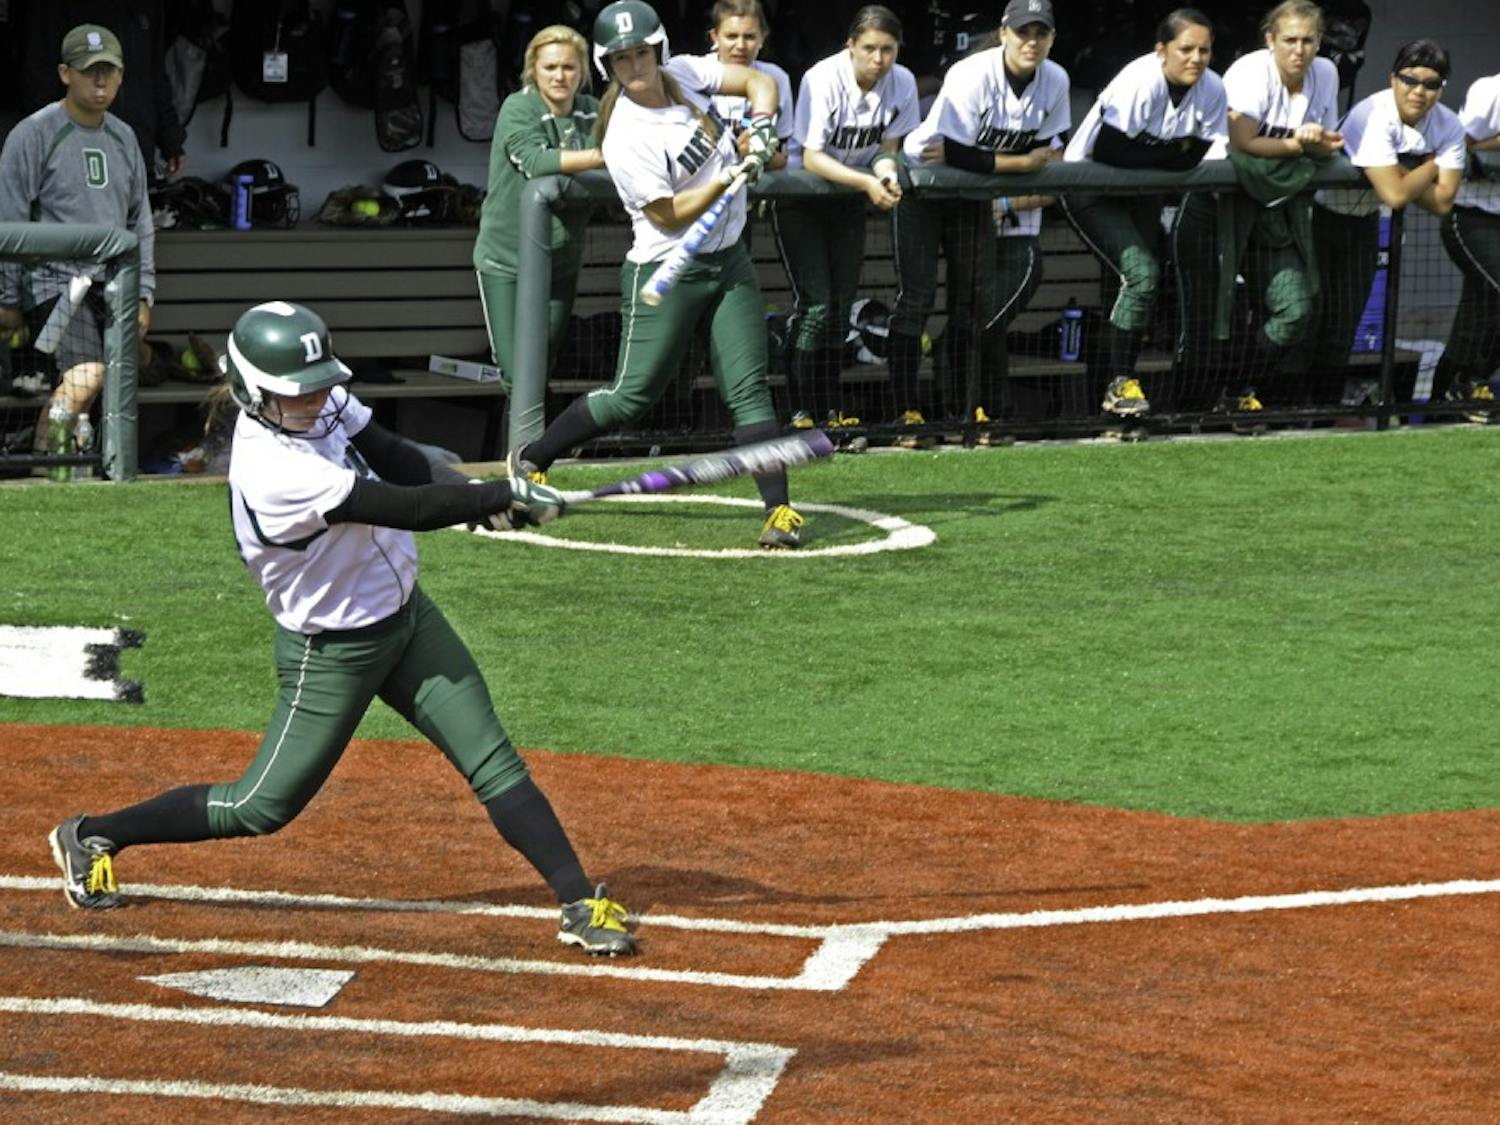 Softball opened its season in Tampa, Florida, this past weekend with a 1-4 start.